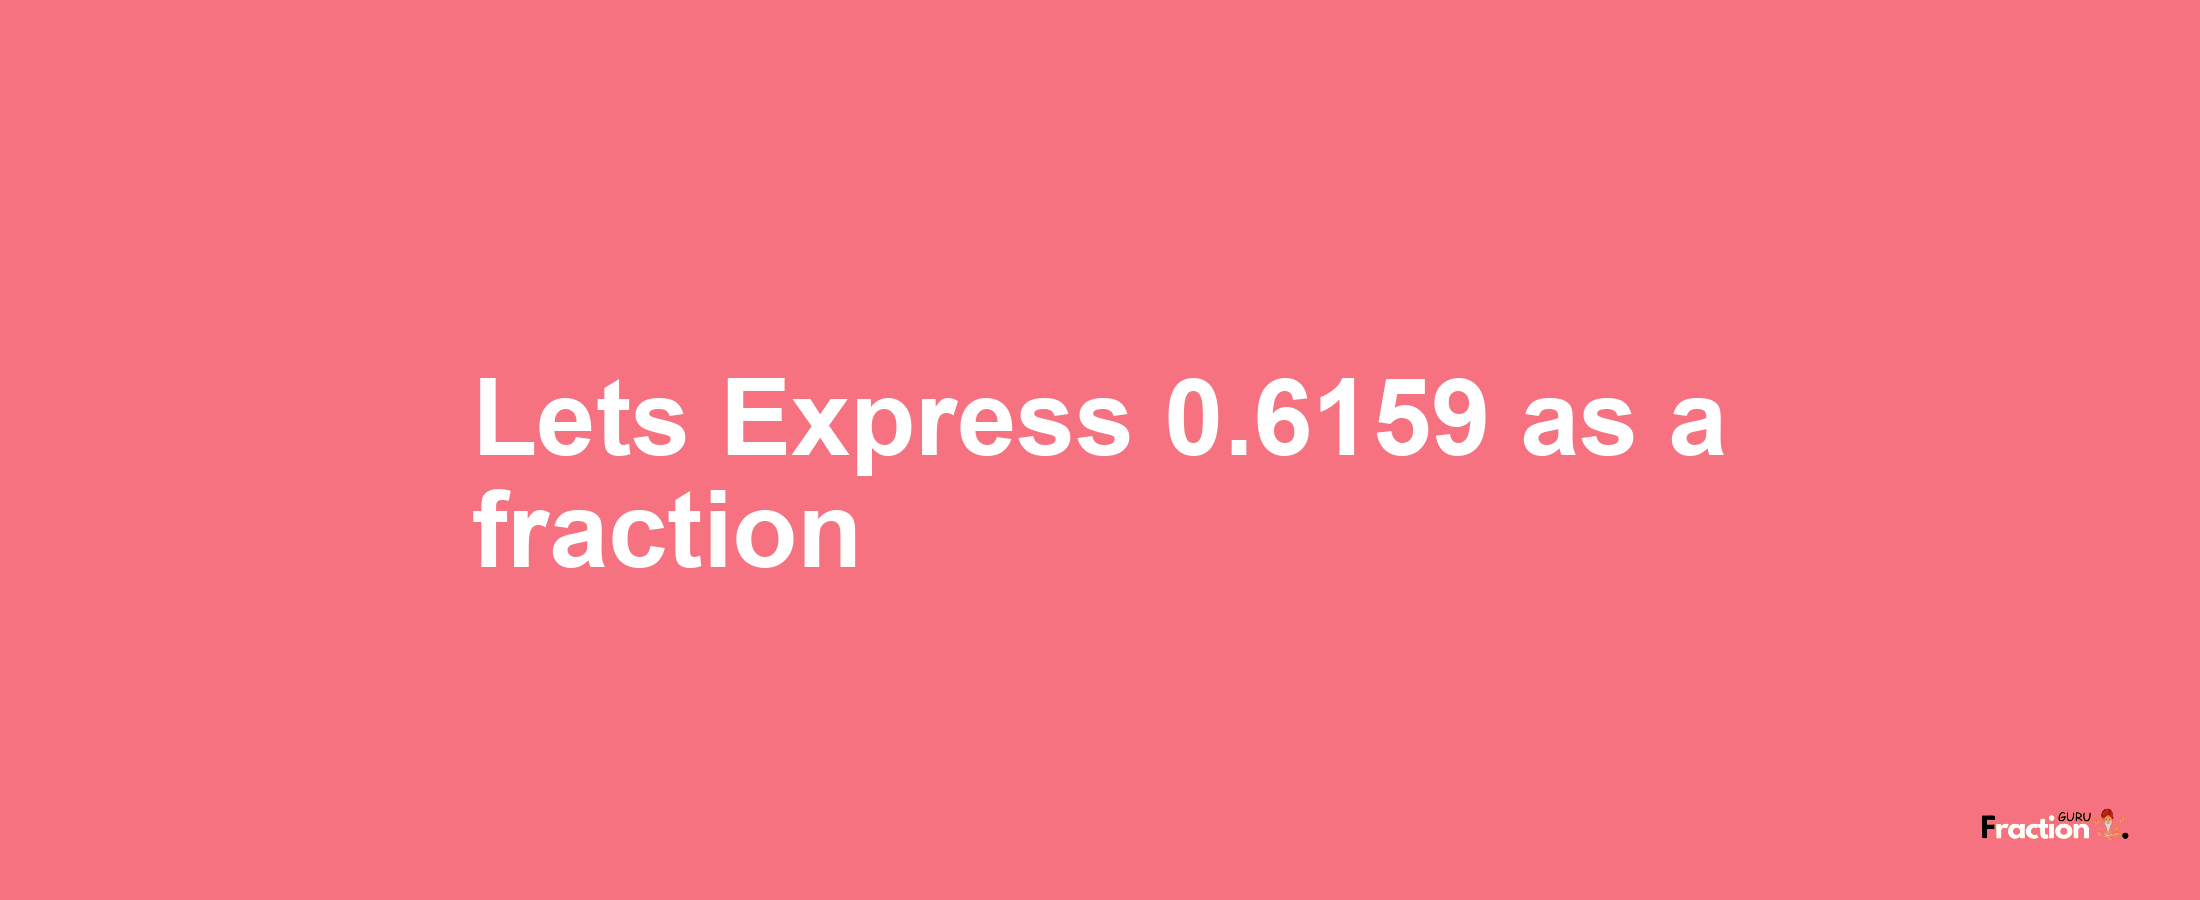 Lets Express 0.6159 as afraction